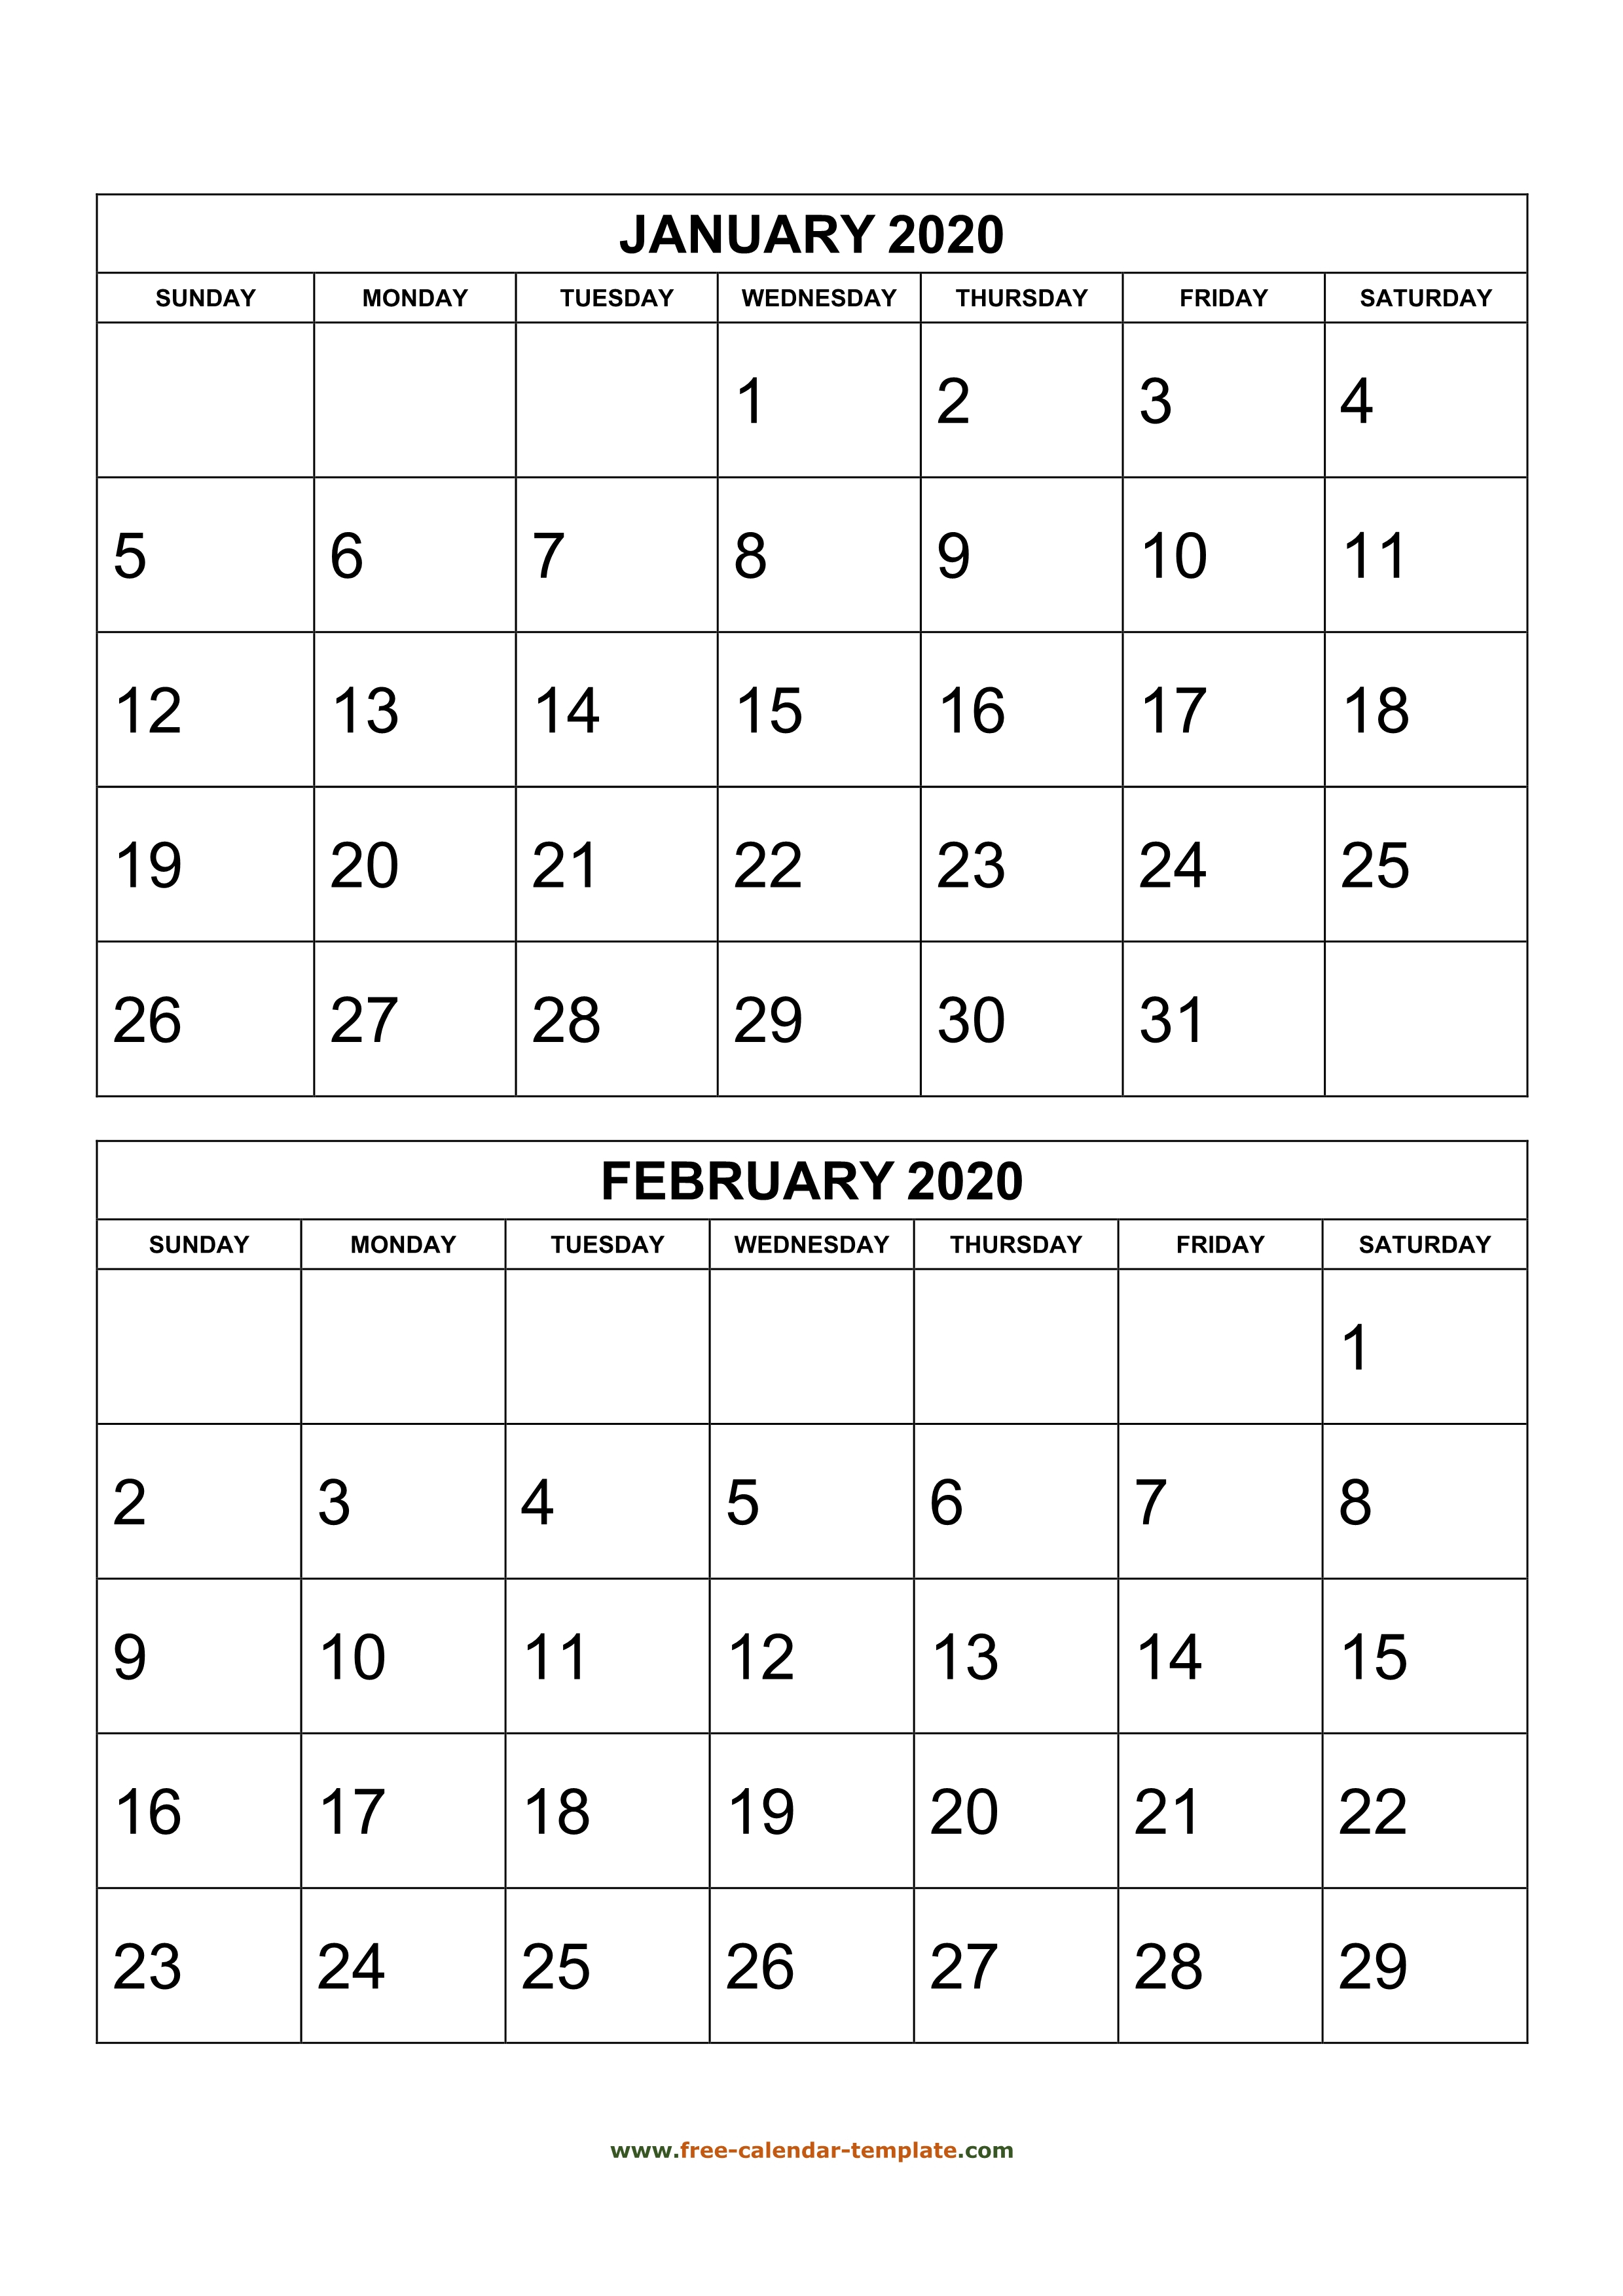 Monthly Calendar 2020, 2 Months Per Page (Vertical) | Free